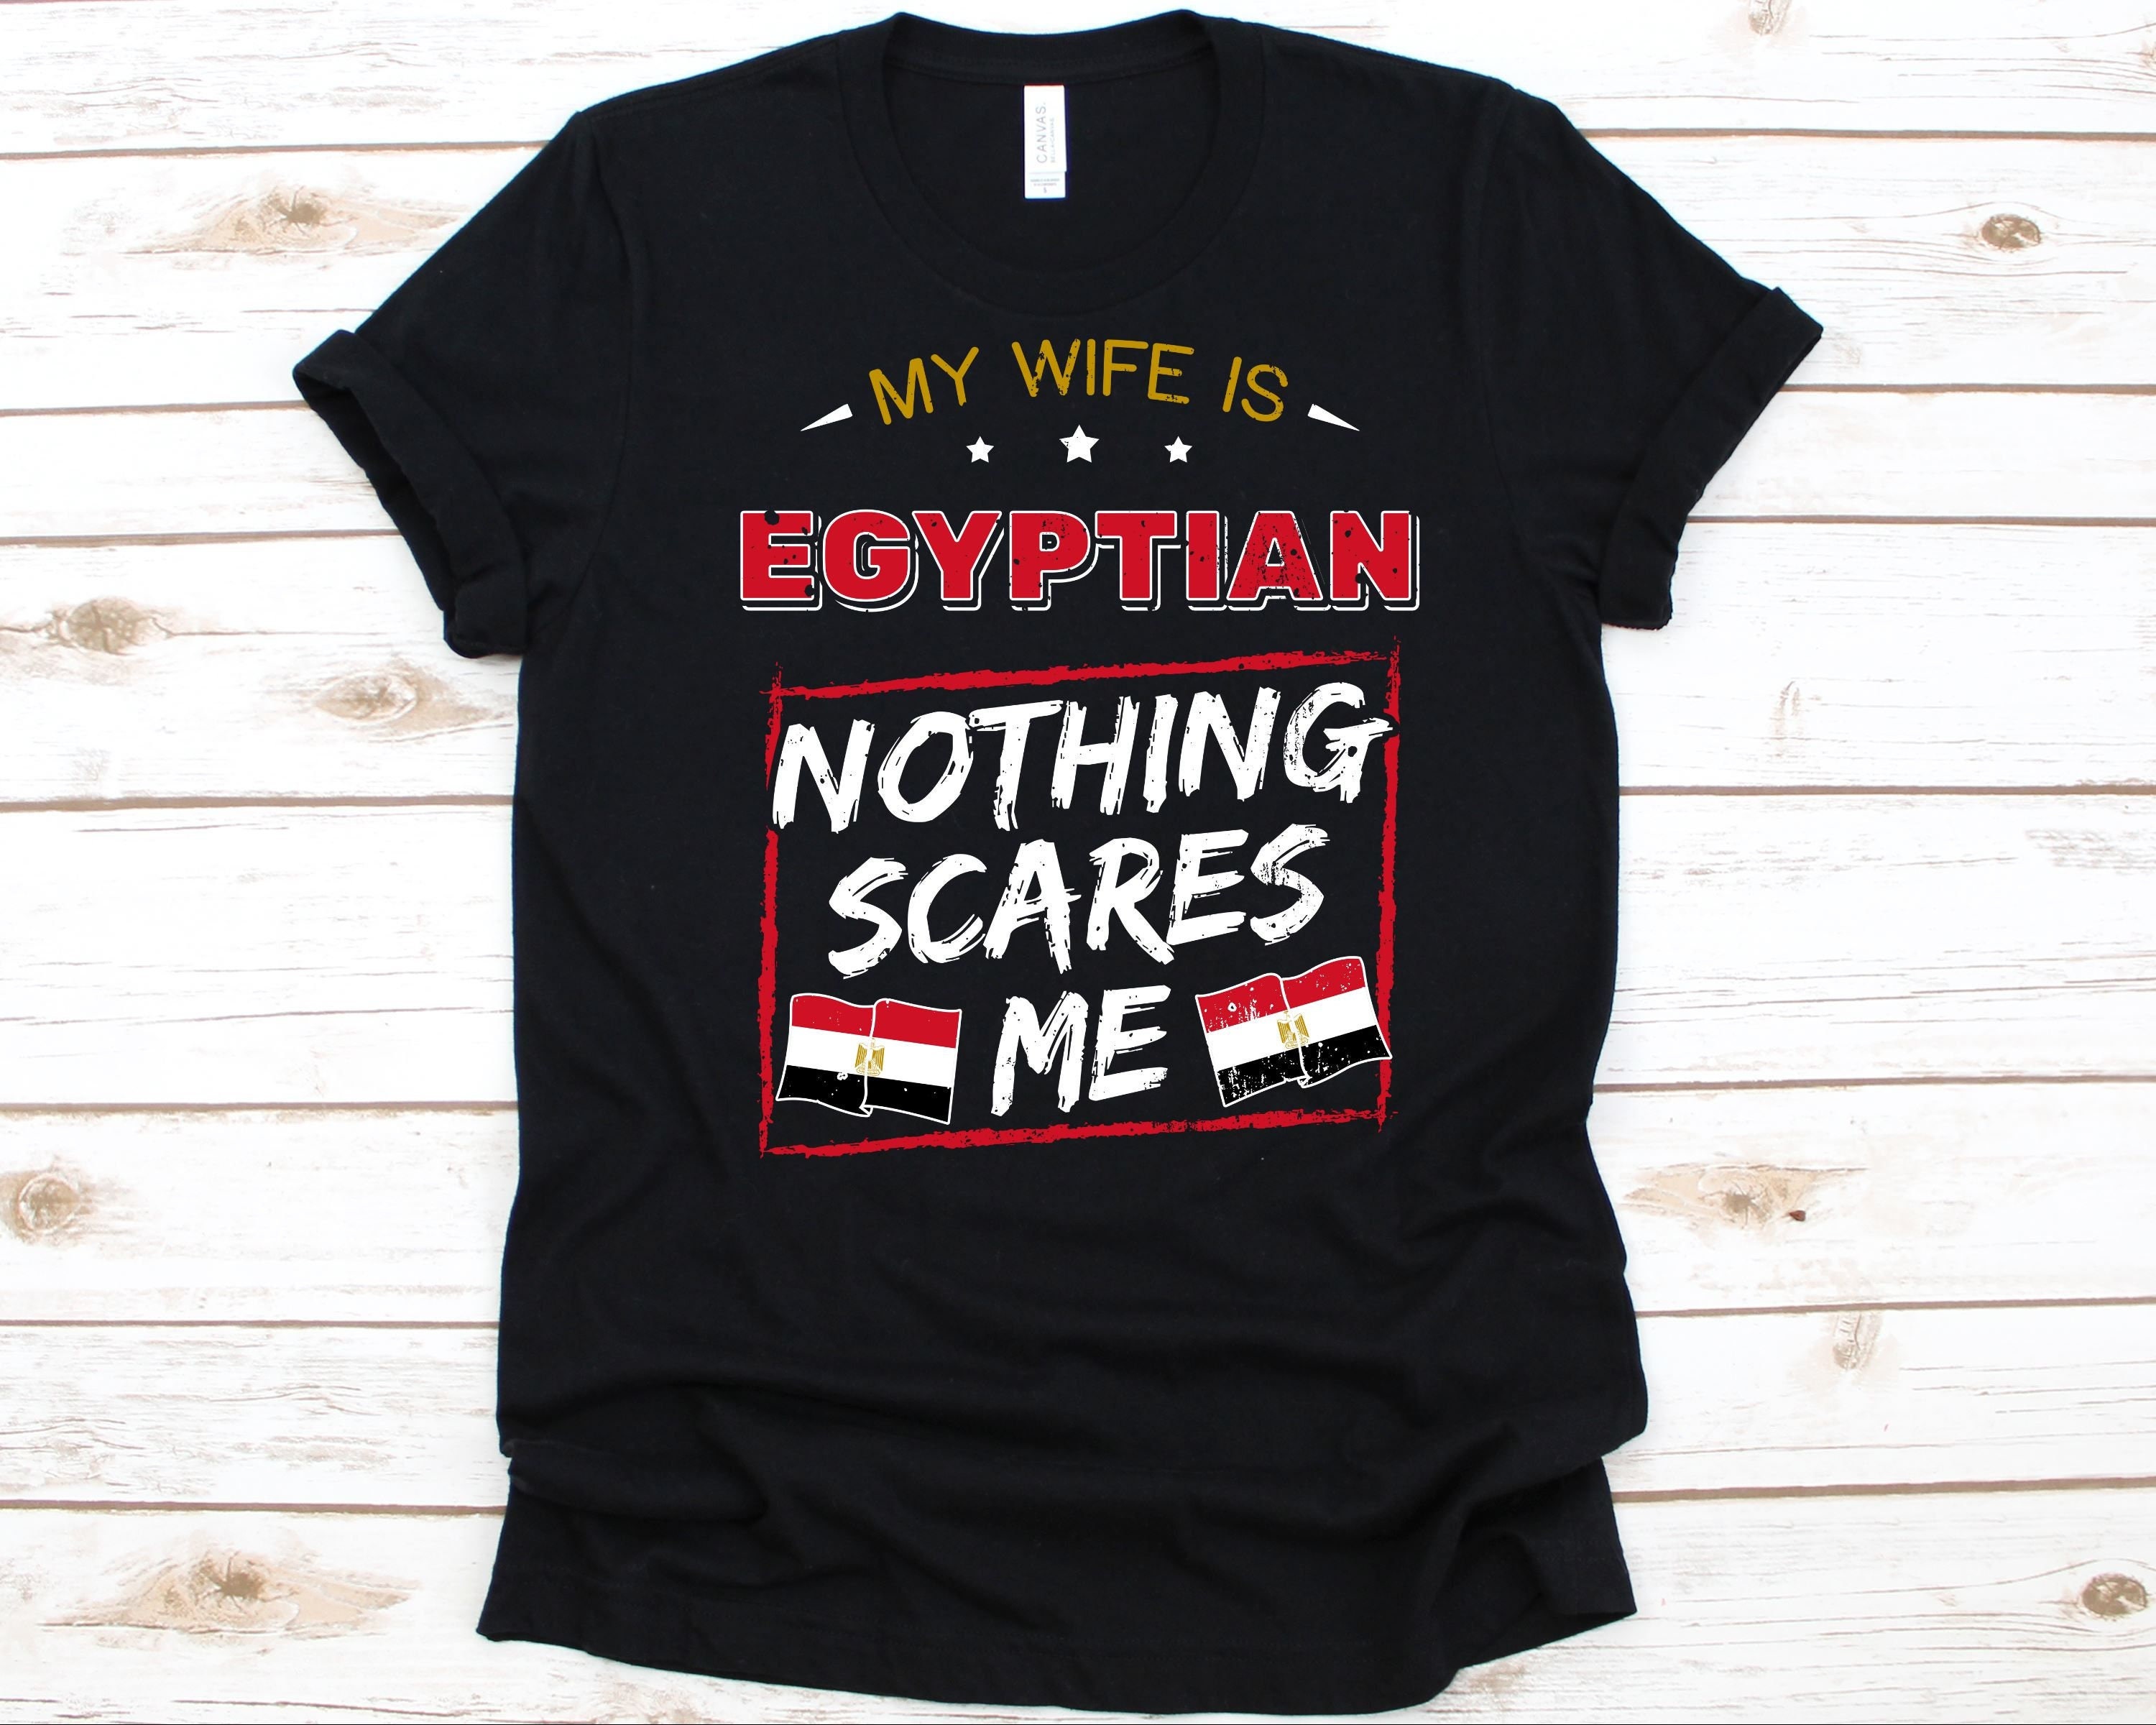 My Wife is Egyptian Nothing Scares Me Shirt, Flag of Egypt Design,  Anniversary Gift for Husband, Funny Marriage Shirt, Egyptian Wife T-shirt -  Etsy Canada